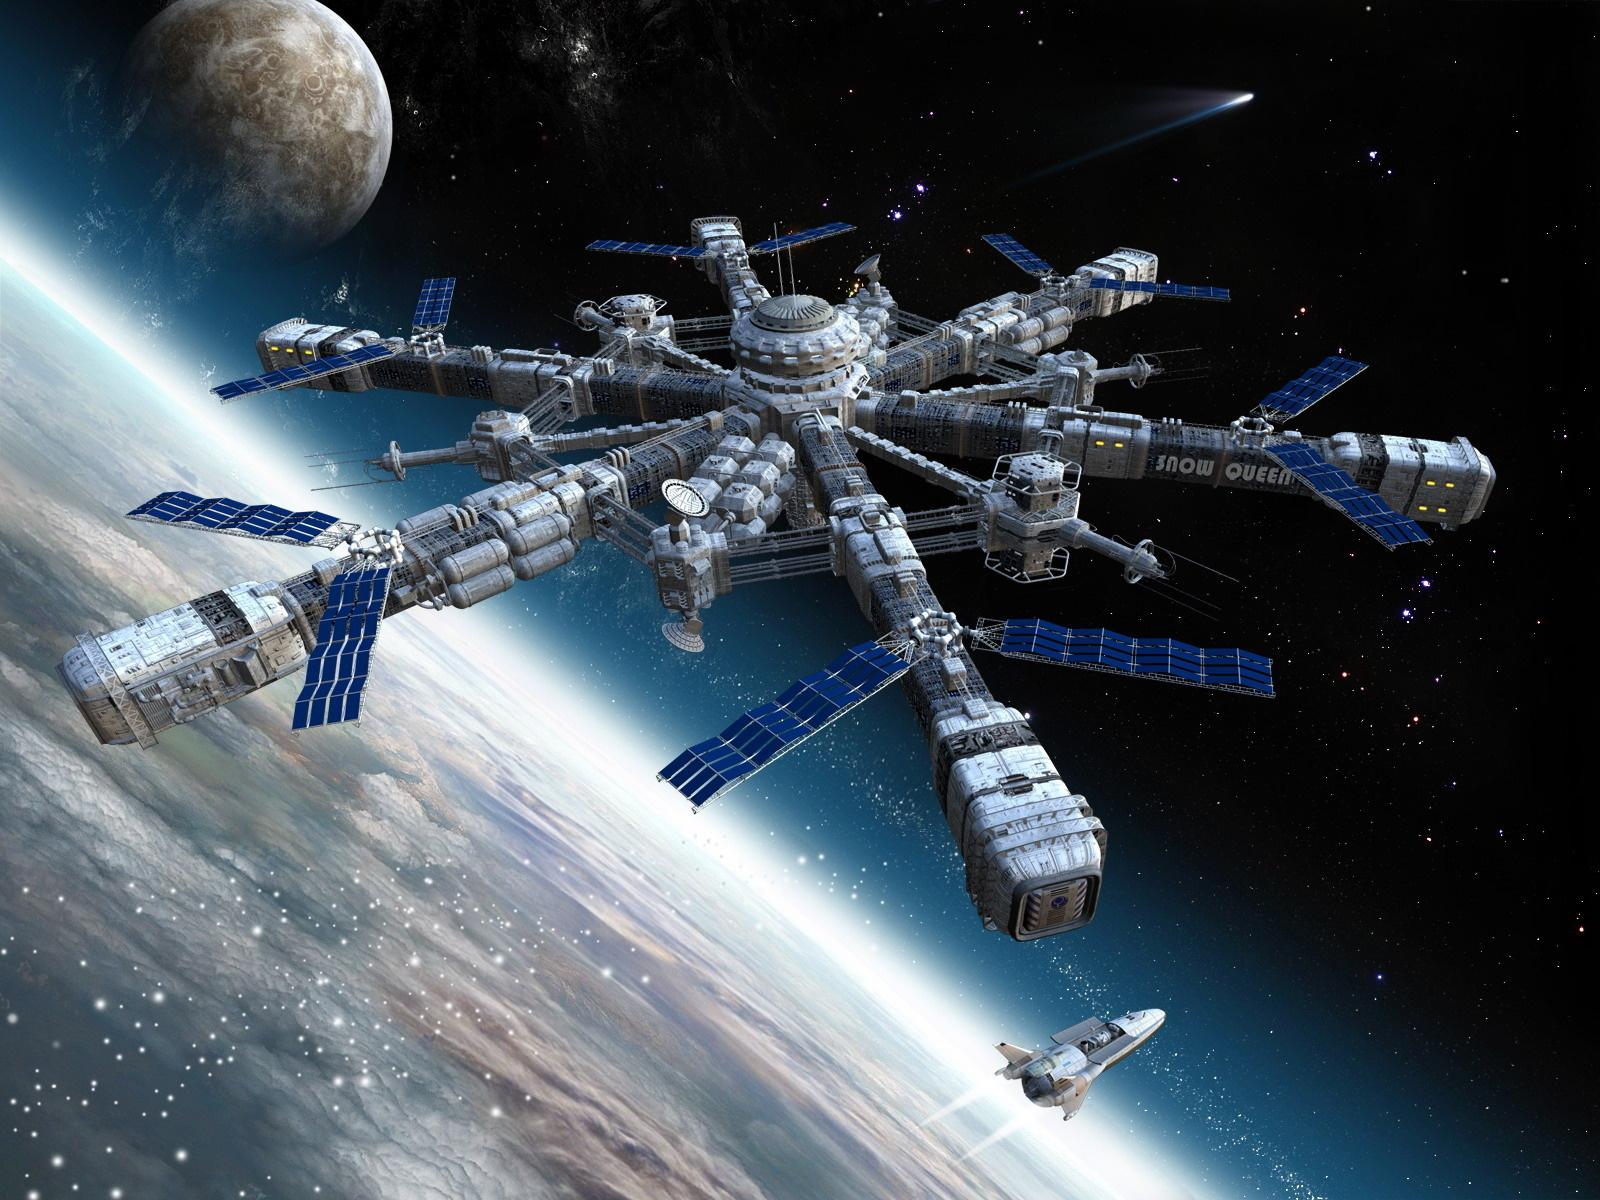 Space Station Wallpaper 20 X 1200